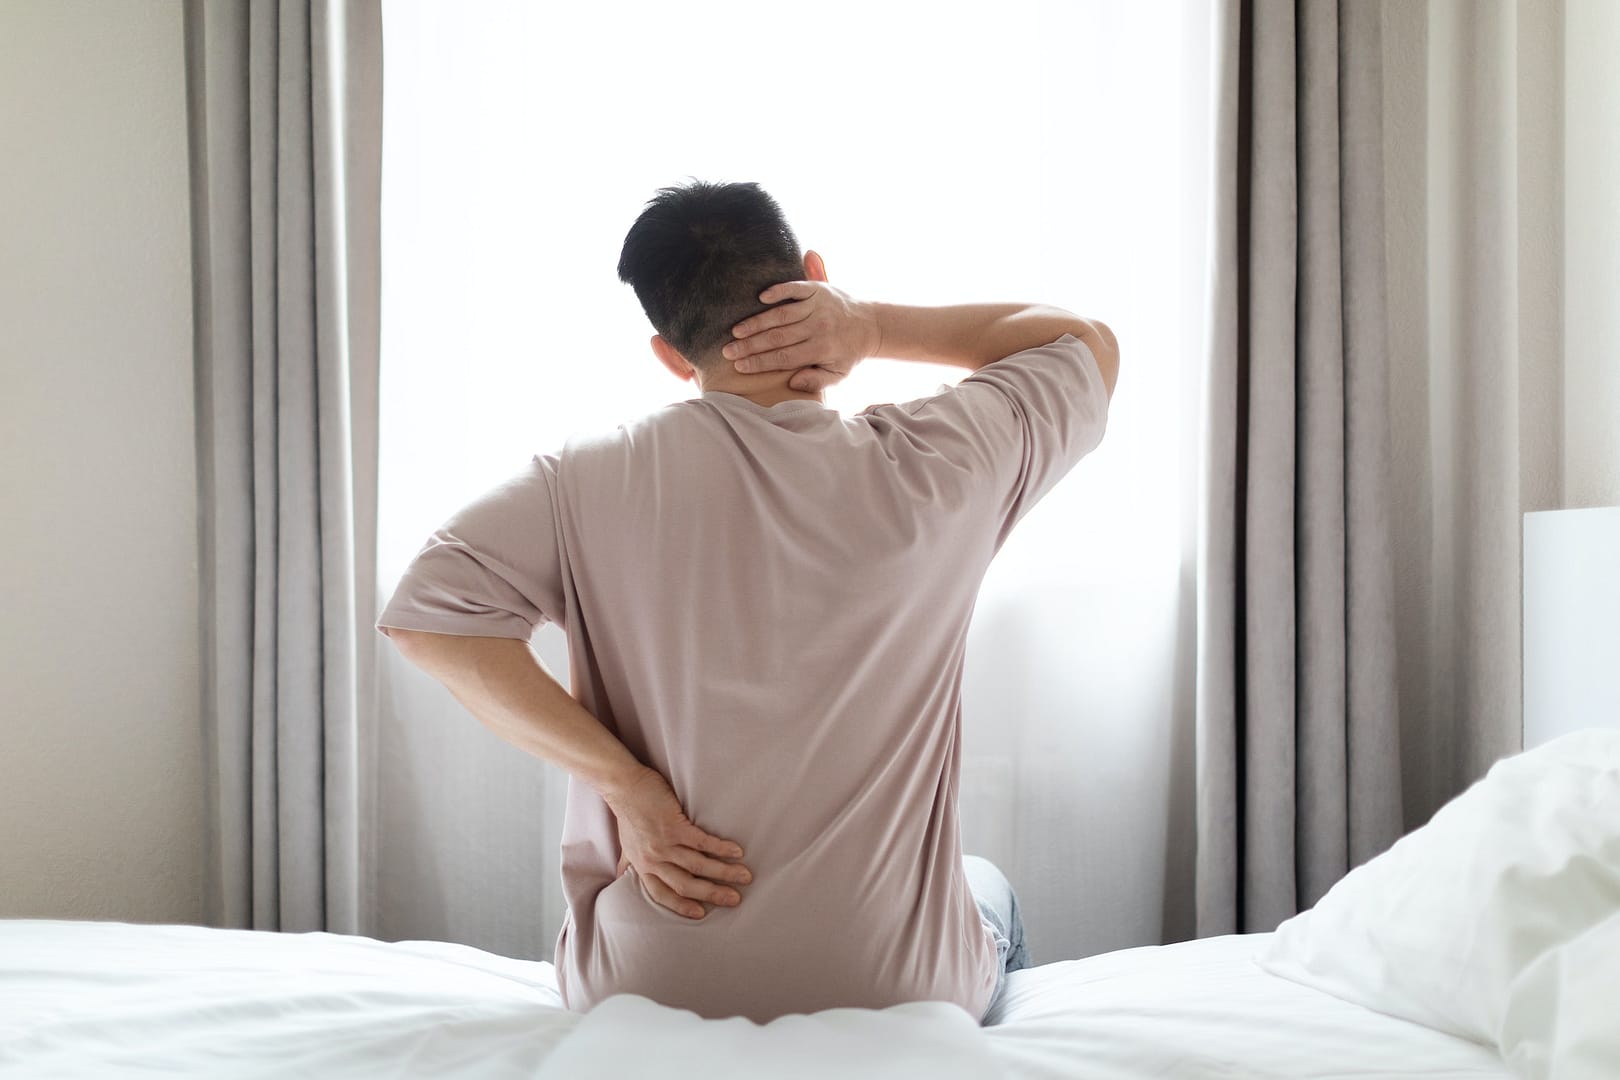 Tired man suffering from back pain from a bad mattress Back Pain care from the Back Pain Project Stamford Darien Norwalk and New Canaan 203-656-3638